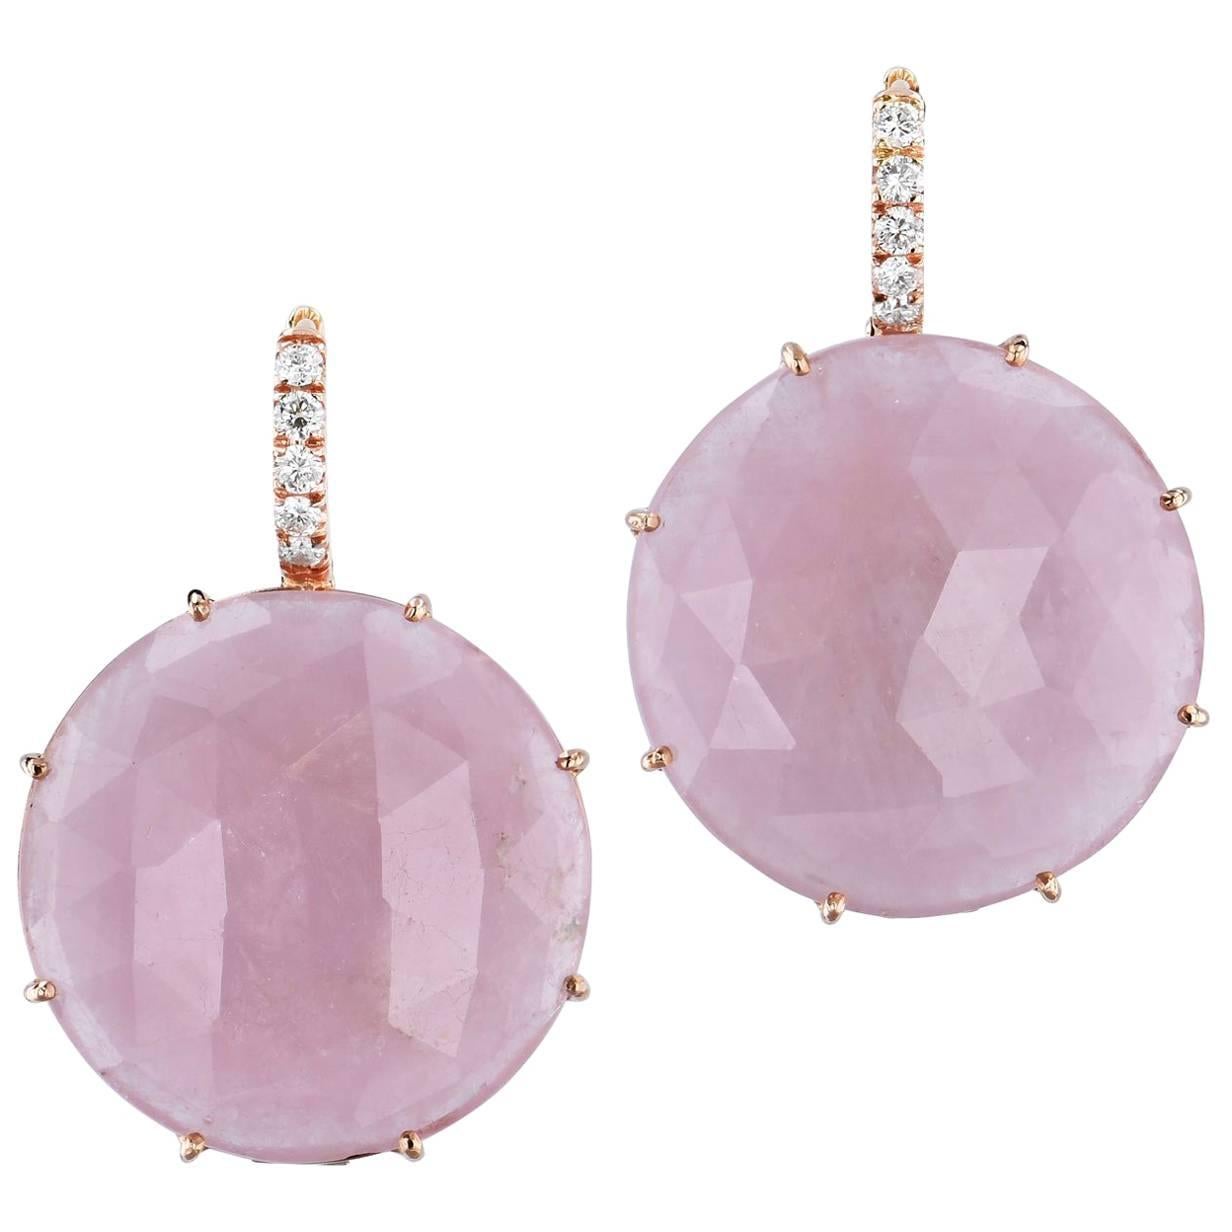 52.52 Carat Pastel Pink Sapphire Slice with Pave Diamonds Lever-Back Earrings